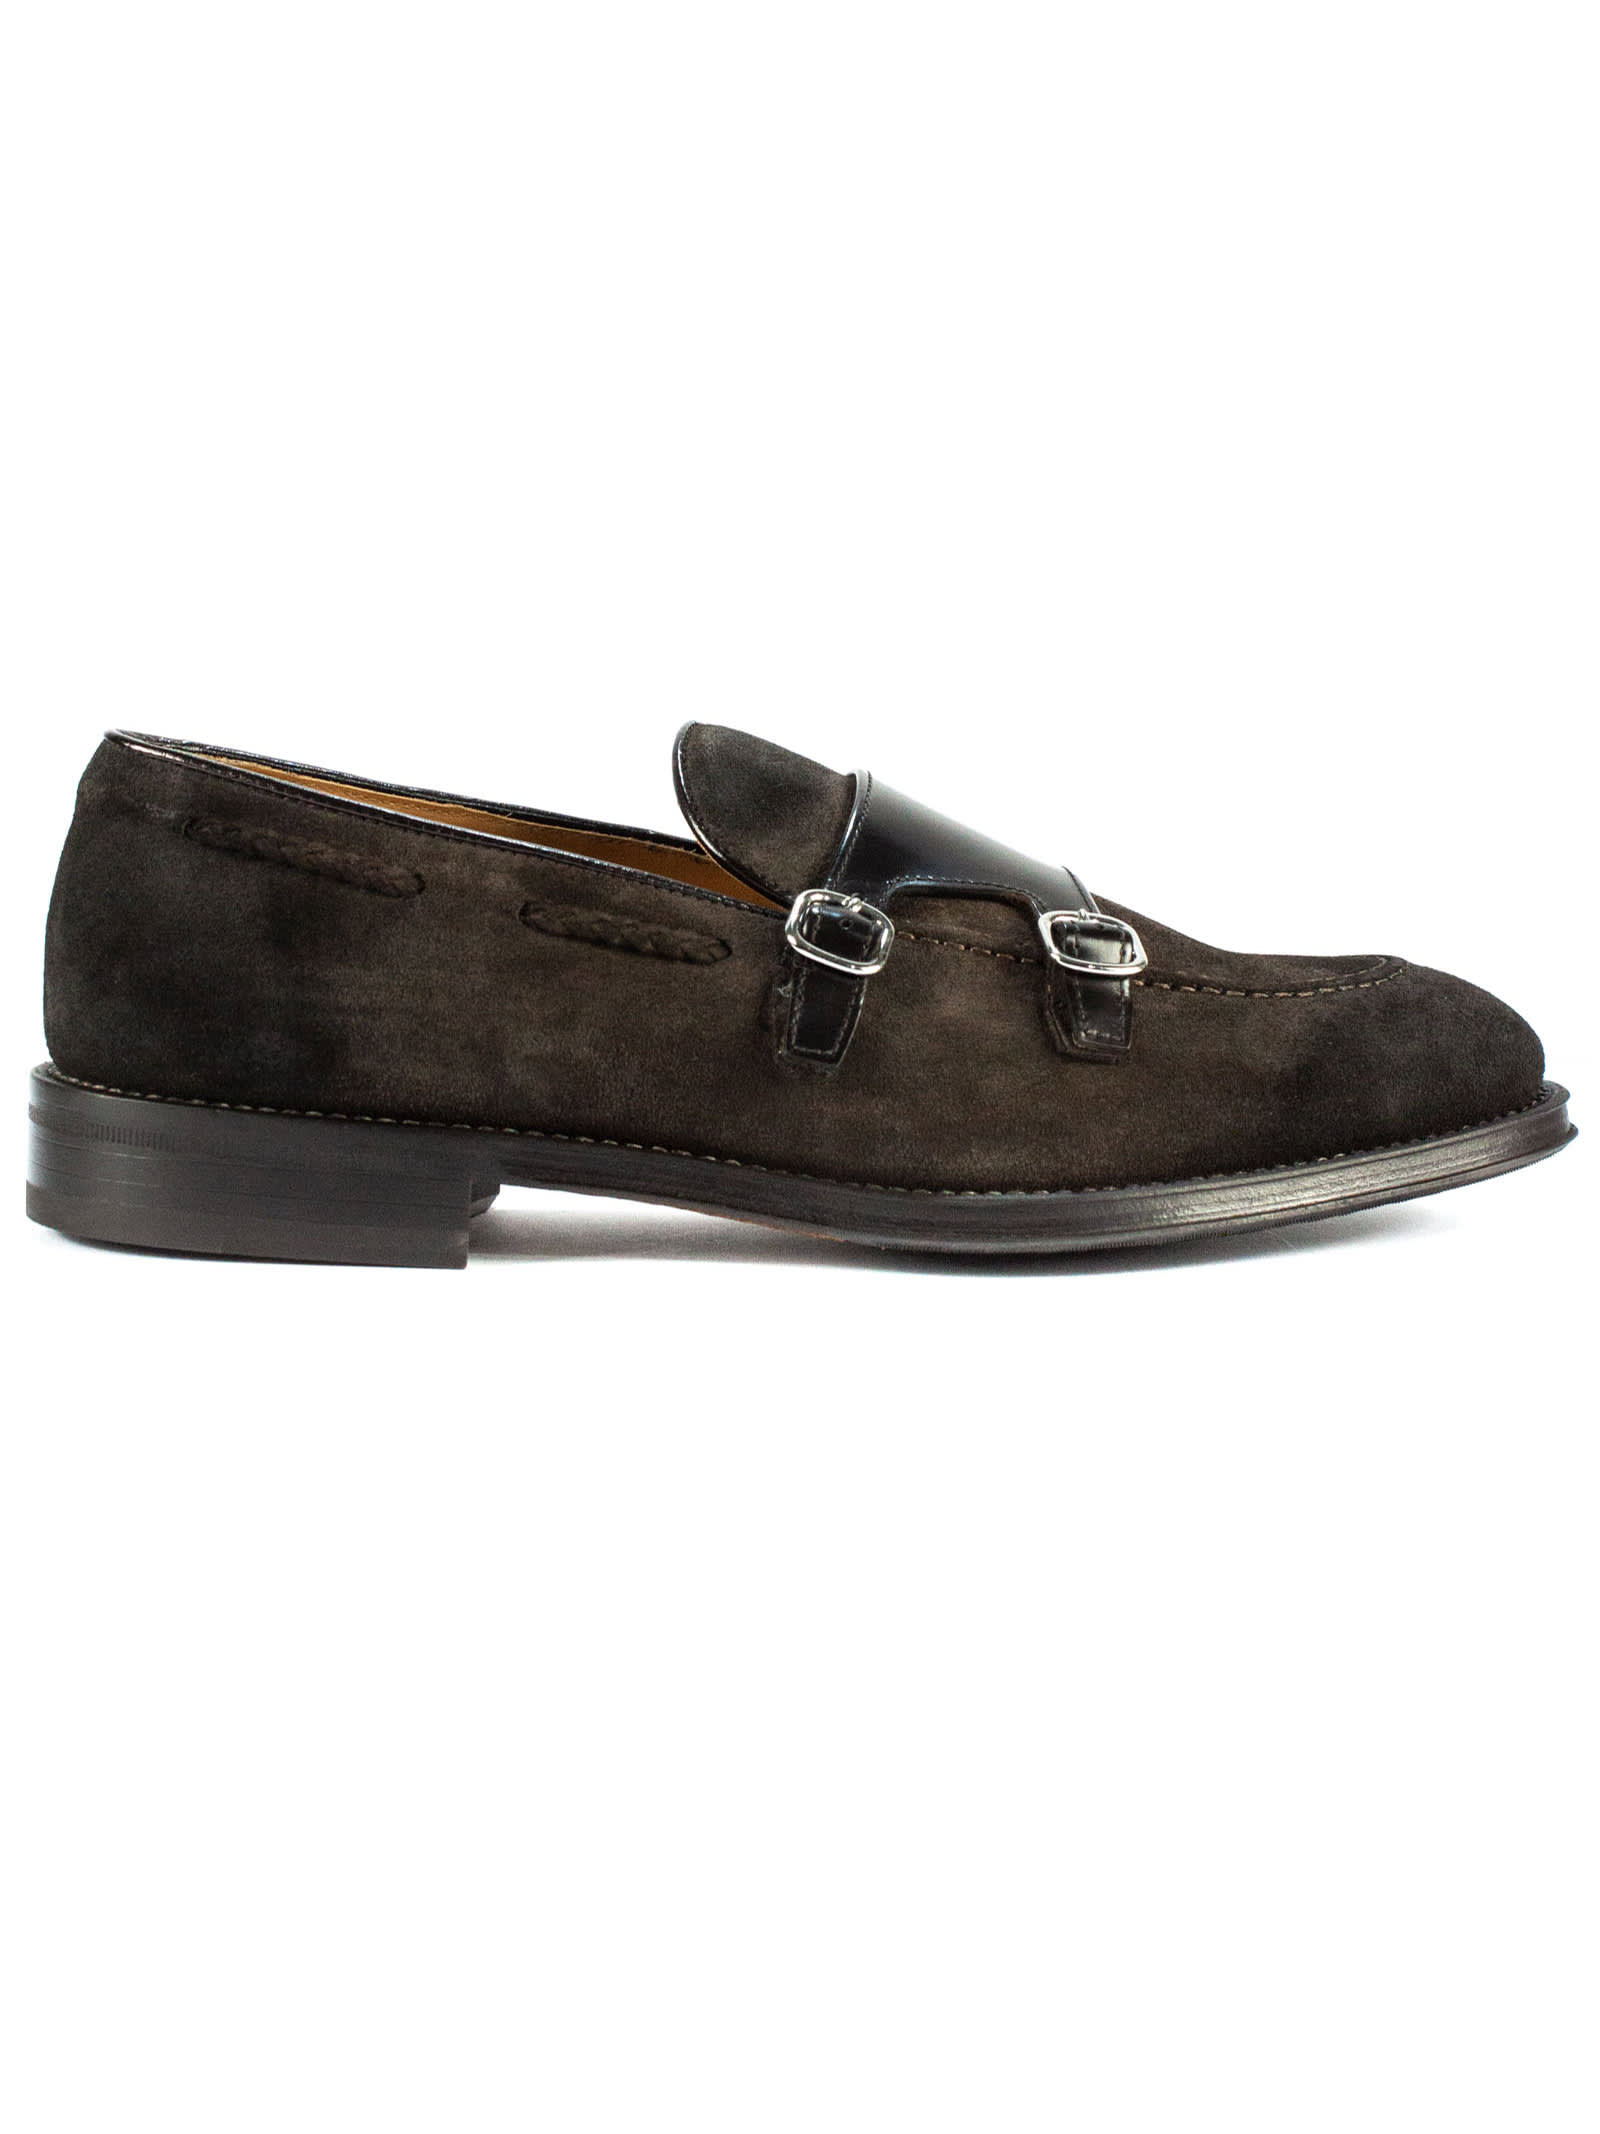 Doucal's Brown Suede Monk Strap Loafers